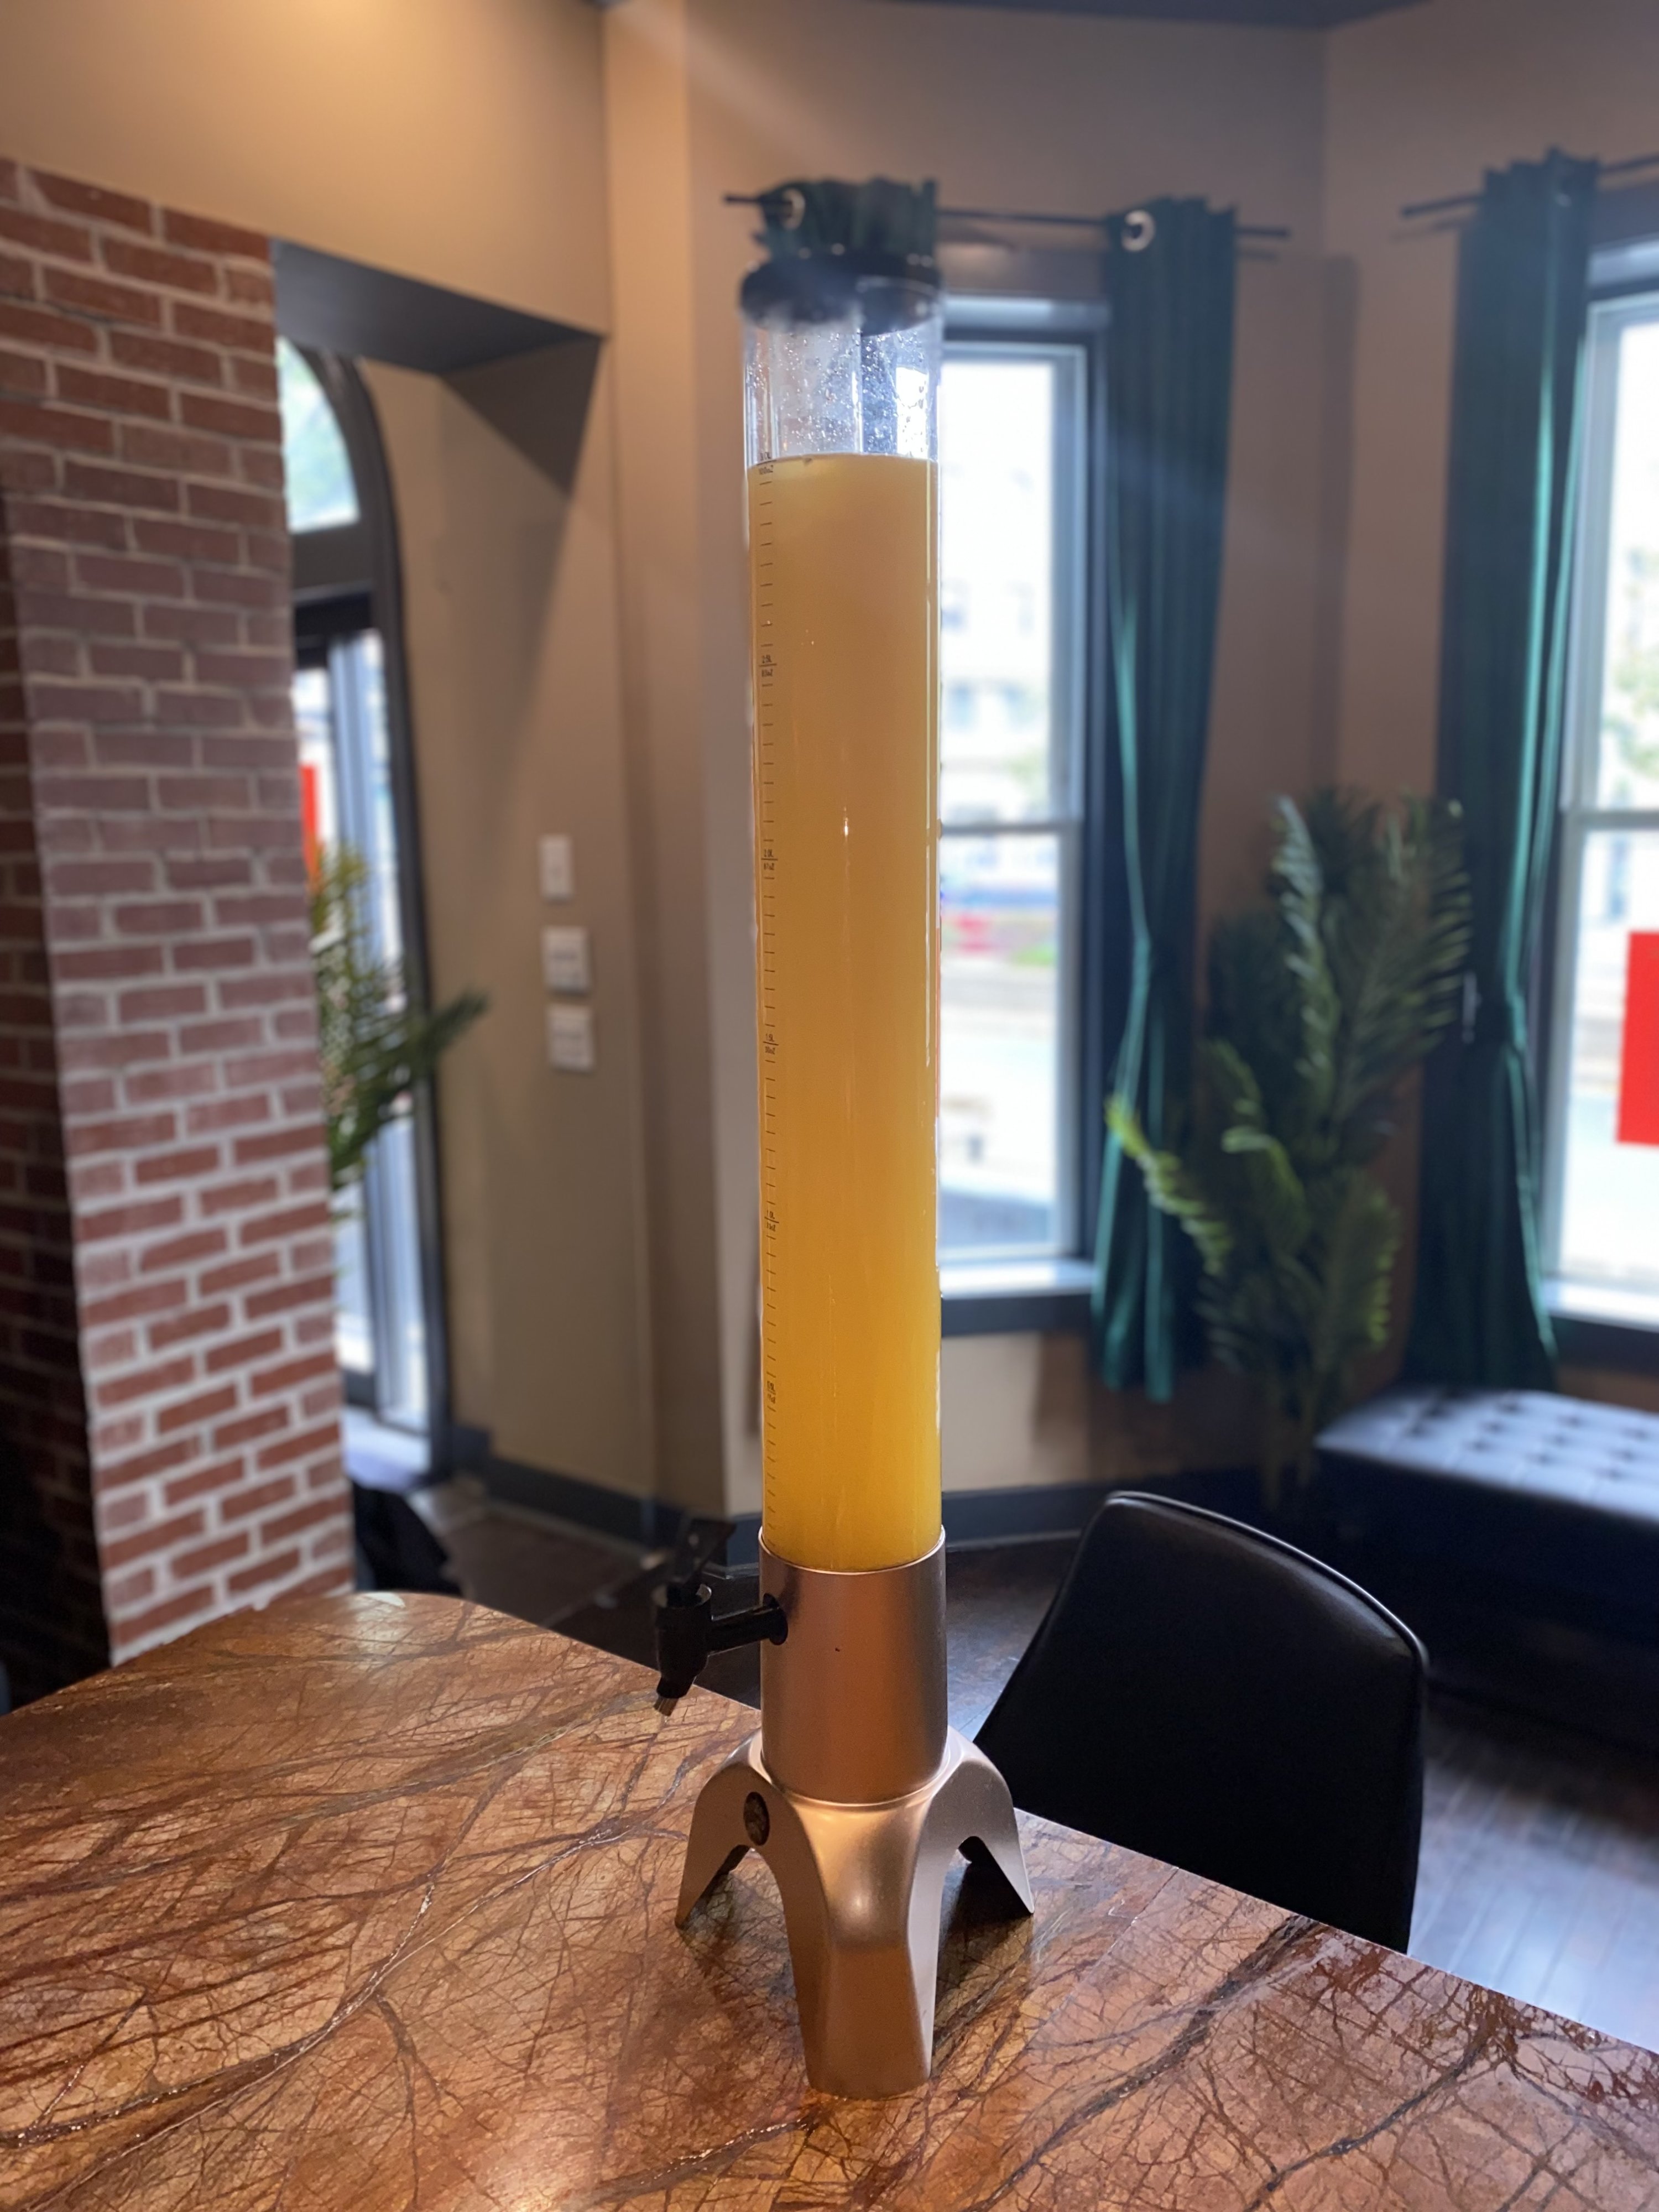 Krave Brings Mimosa Towers and '90s Vibes to Dupont - Eater DC